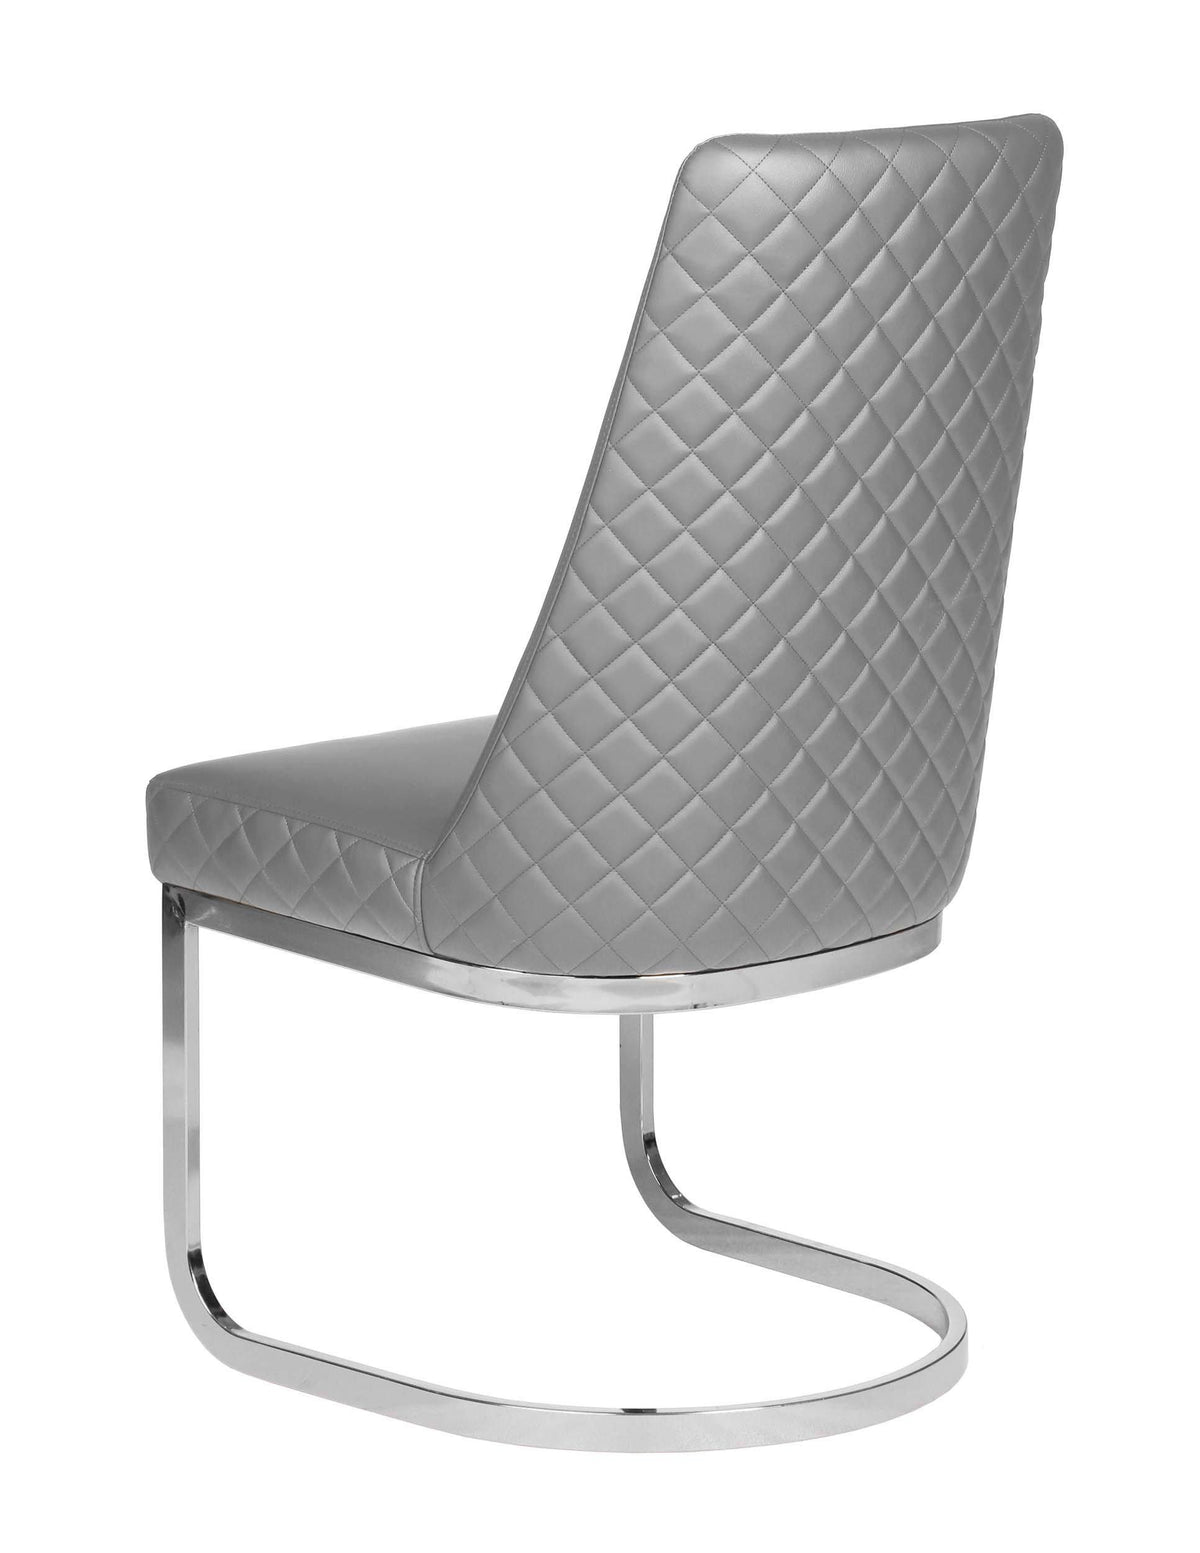 Whale Spa - Customer Chair with Diamond or Chevron Pattern - Superb Nail Supply